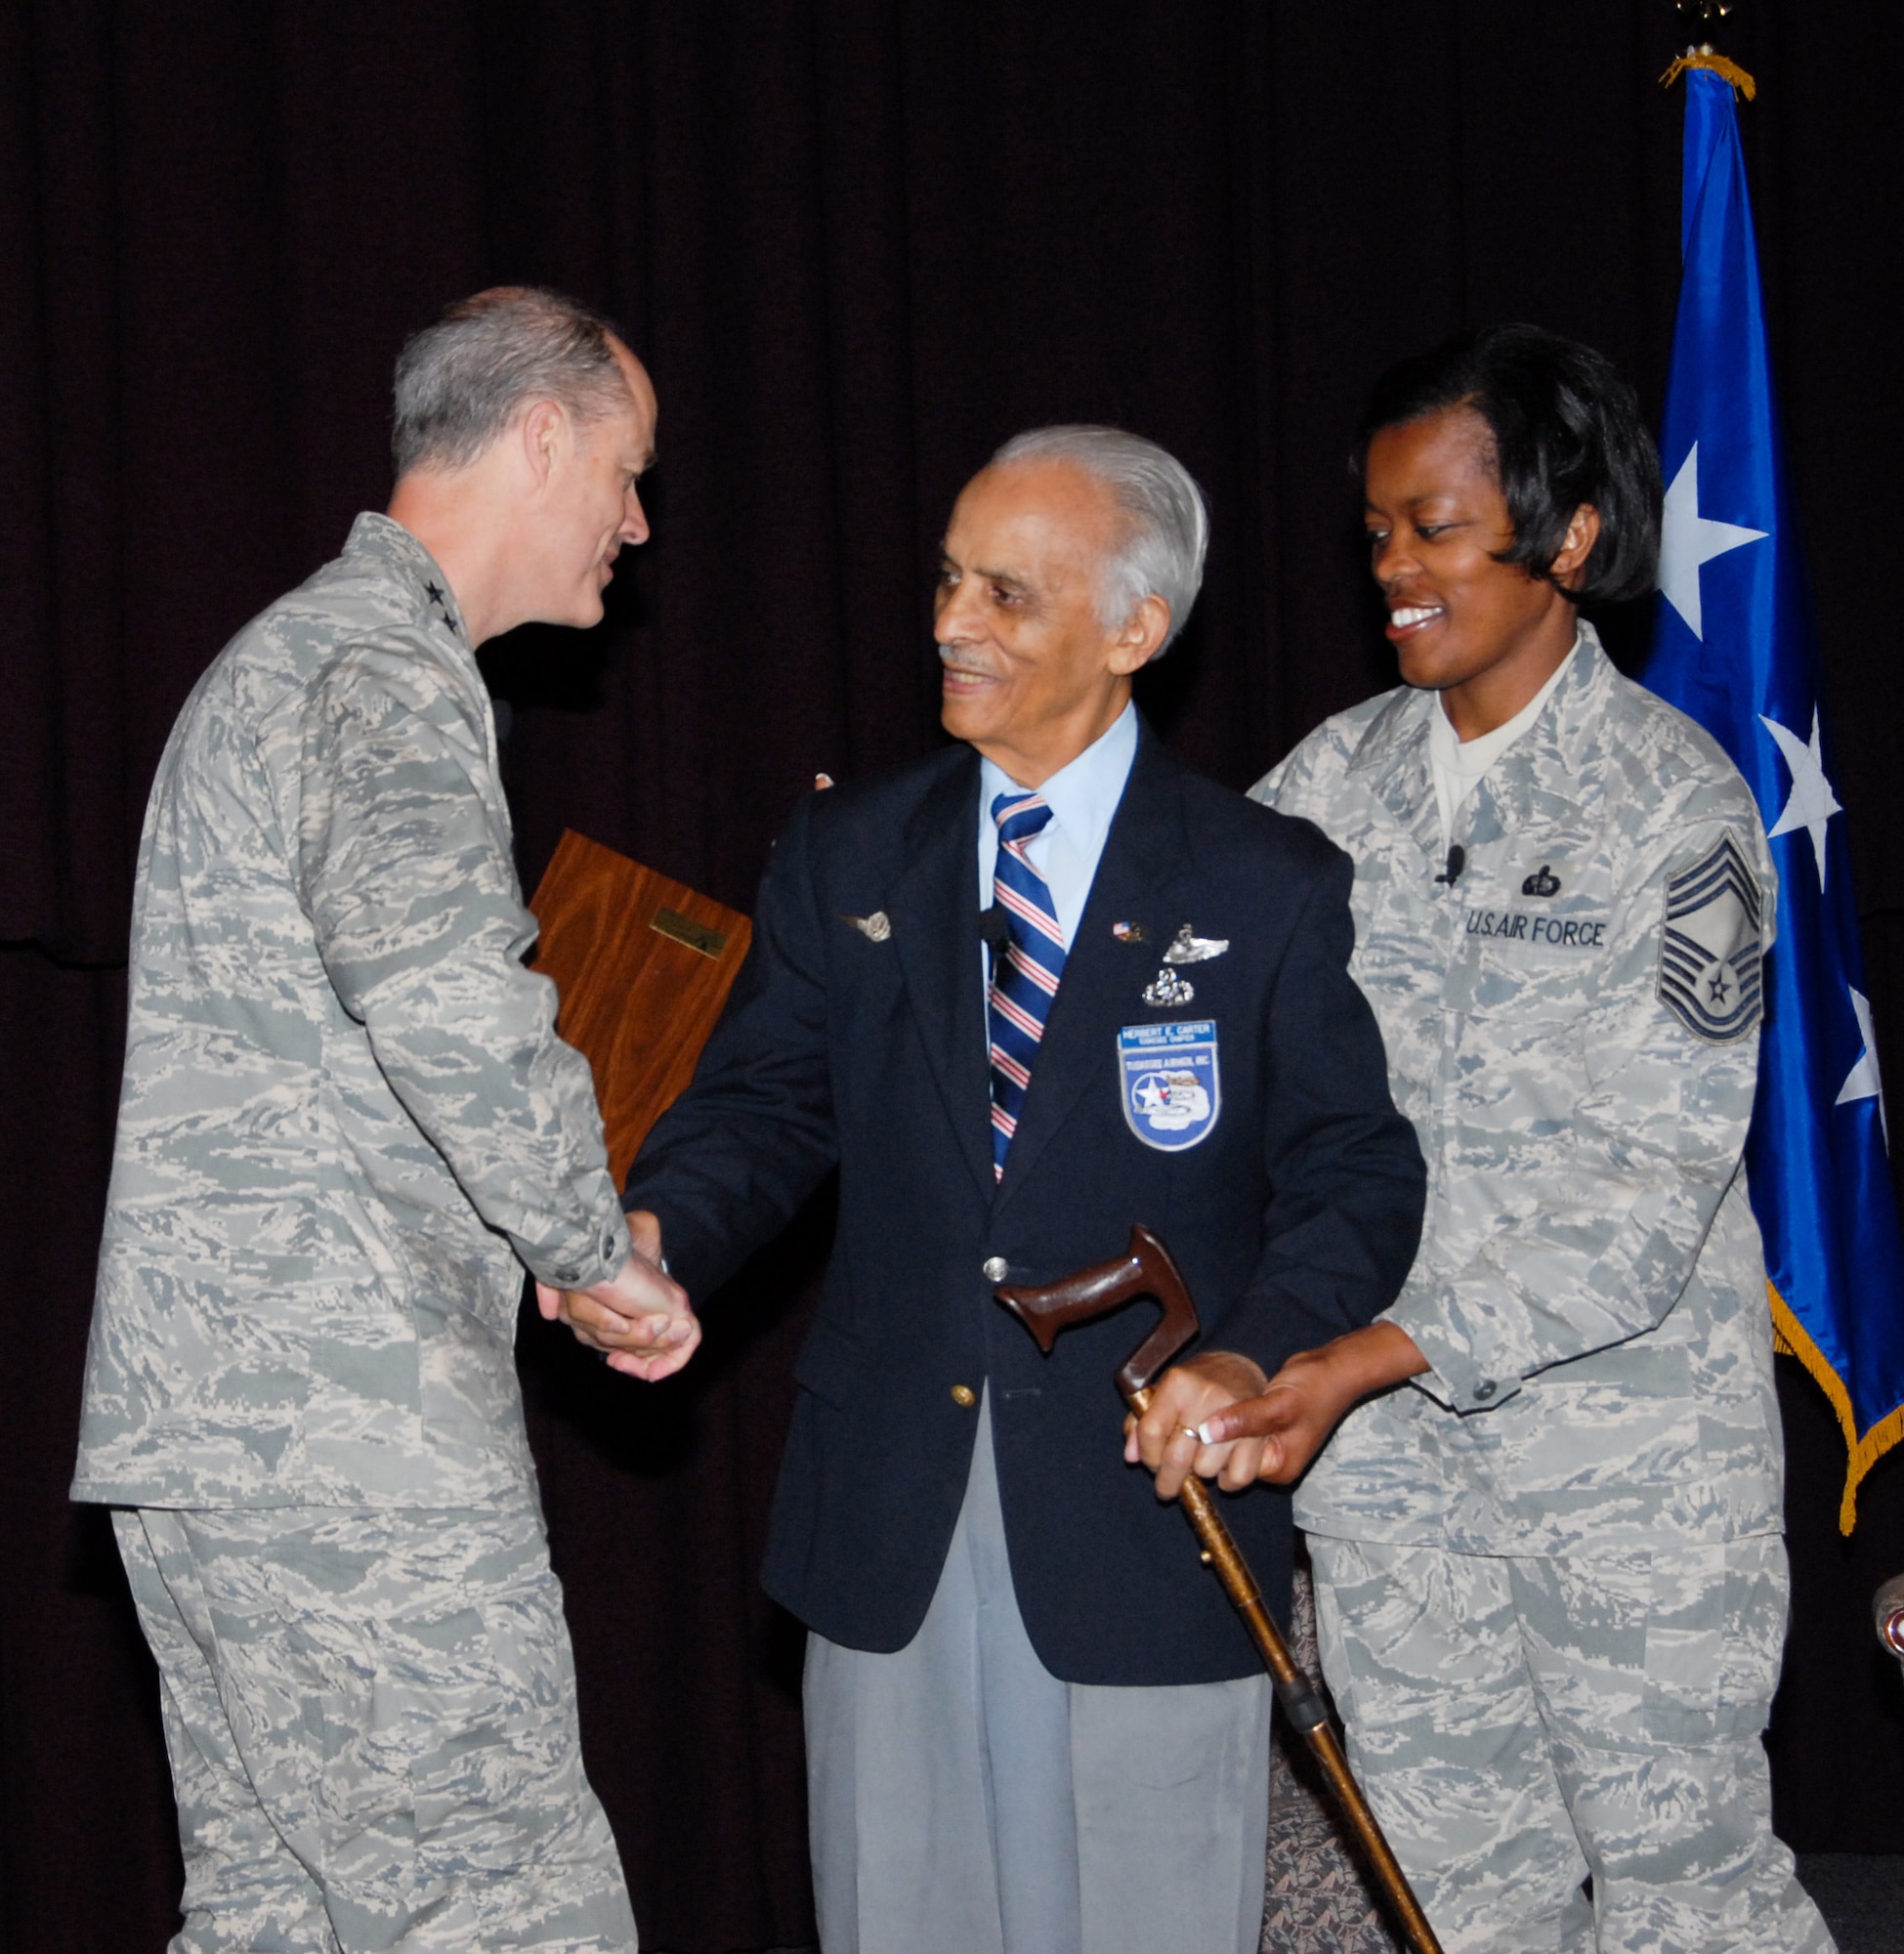 While speaking at Gunter's Senior Non-Commissioned Officer Academy on April 1, Lt. Col. (ret.) Herbert Carter was surprised with the academy's honorary diploma by Lt. Gen. Allen G. Peck (left), commander of Air University. Colonel Carter was invited to the academy to tell of his experiences as a member of the famed Tuskegee Airmen of World War II. According to the academy's Chief Master Sgt. Michael Foster, Colonel Carter has spoken to 68 SNCOA classes and more than 20,000 students since 1997. Also shown is Chief Master Sgt. Shelia Knox, vice commandant of the SNCOA. (Air Force photo by Bud Hancock)